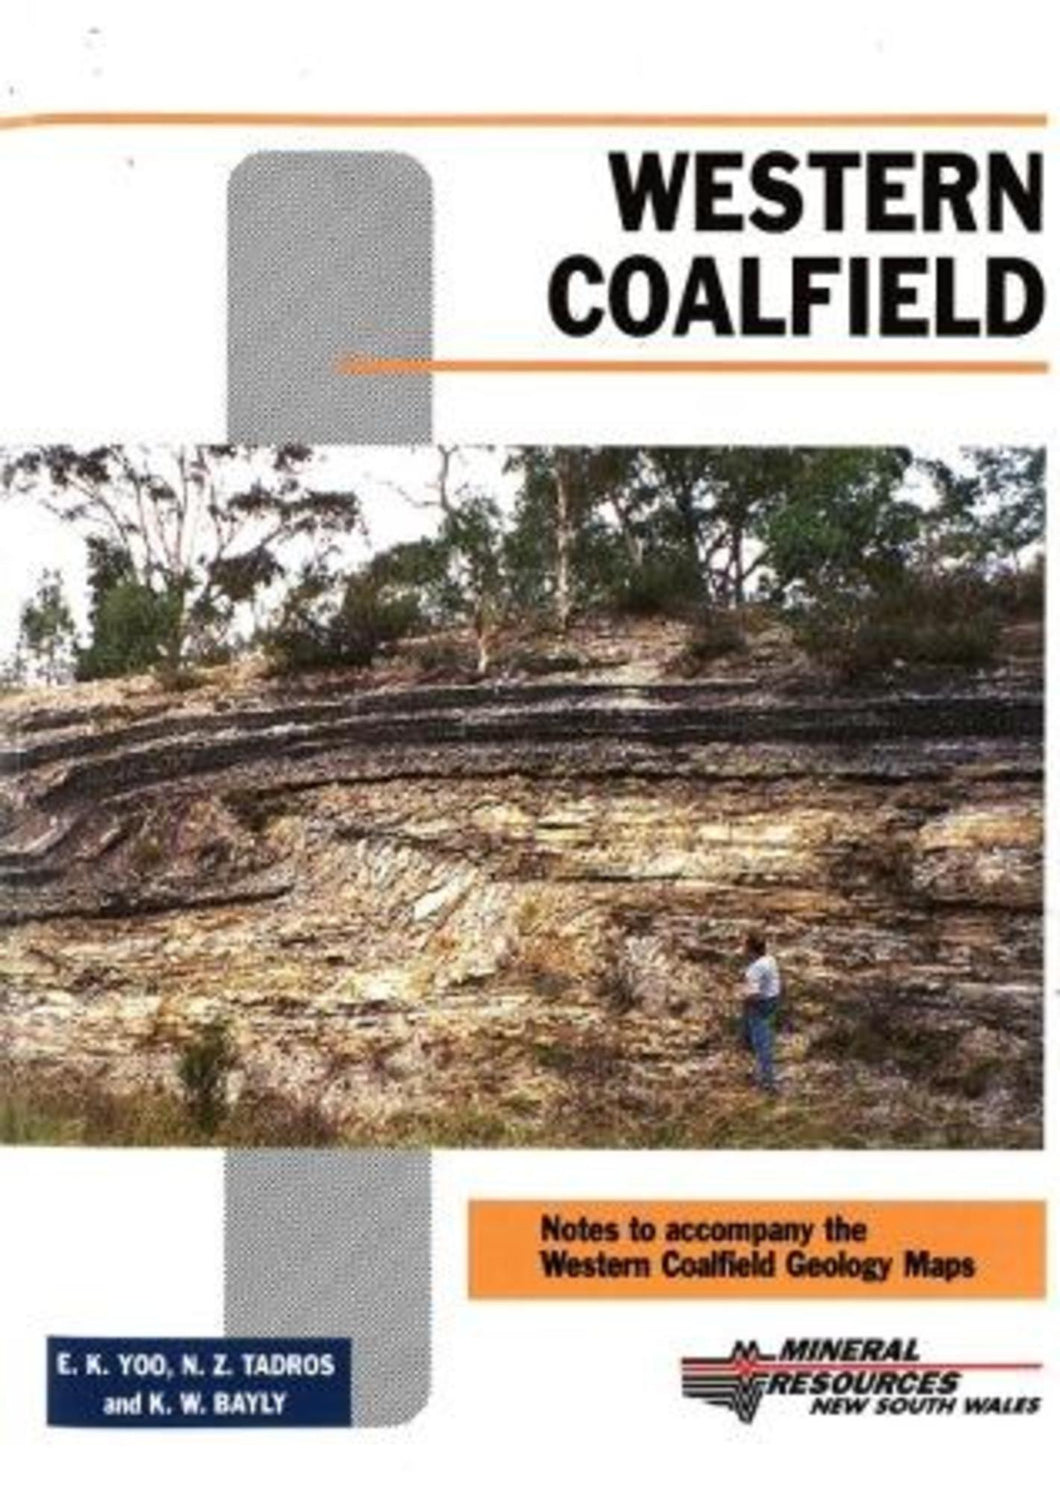 Image of Western Coalfield Geological Explanatory Notes 2001 book cover